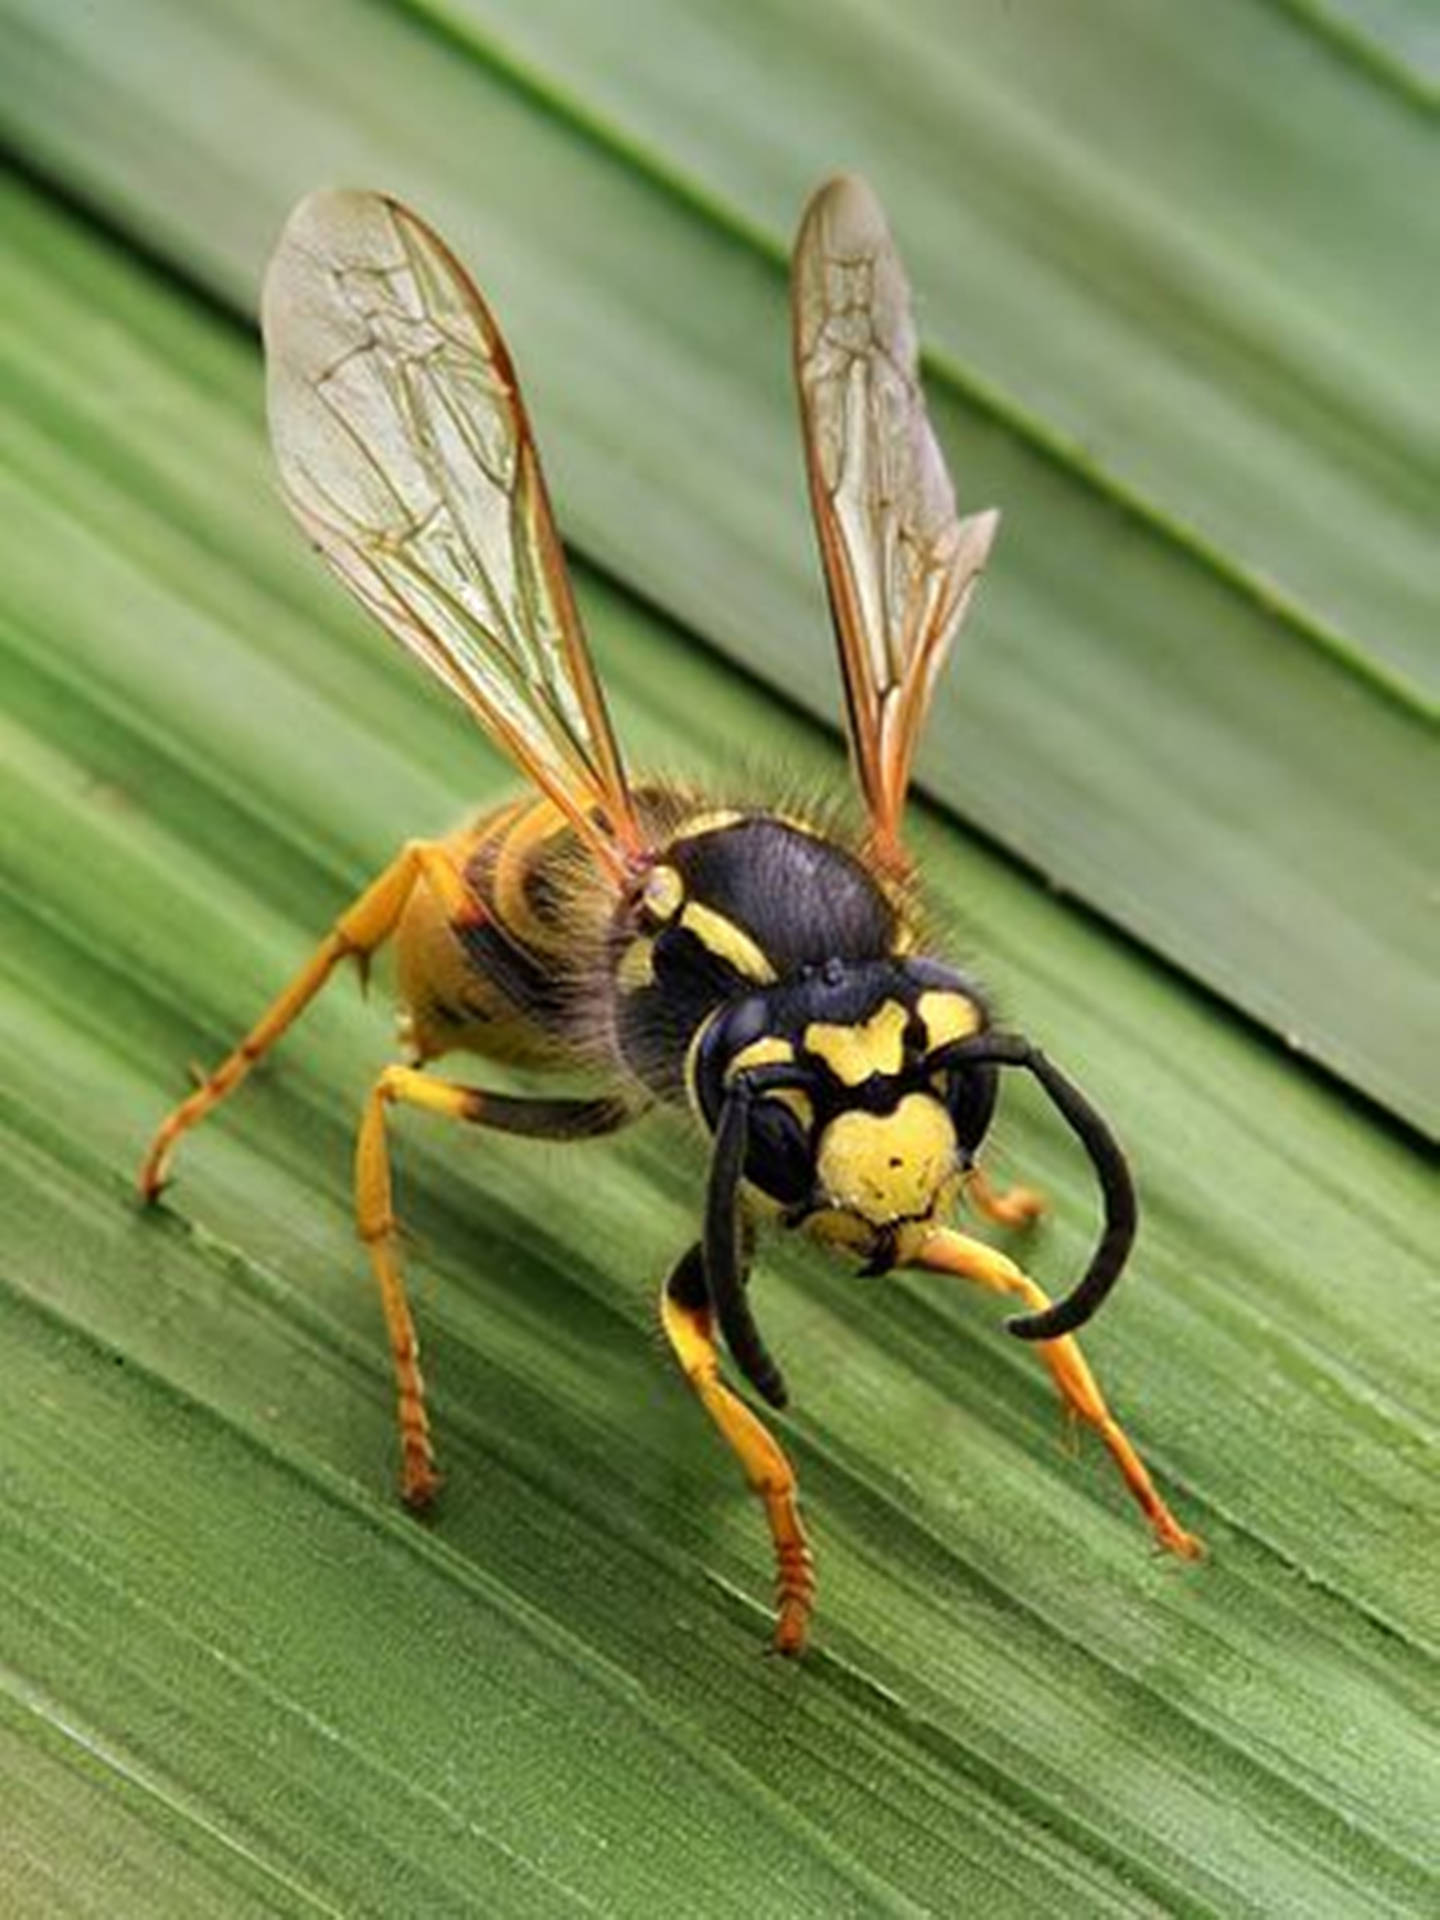 Wasp Stinging Flying Insect Wallpaper